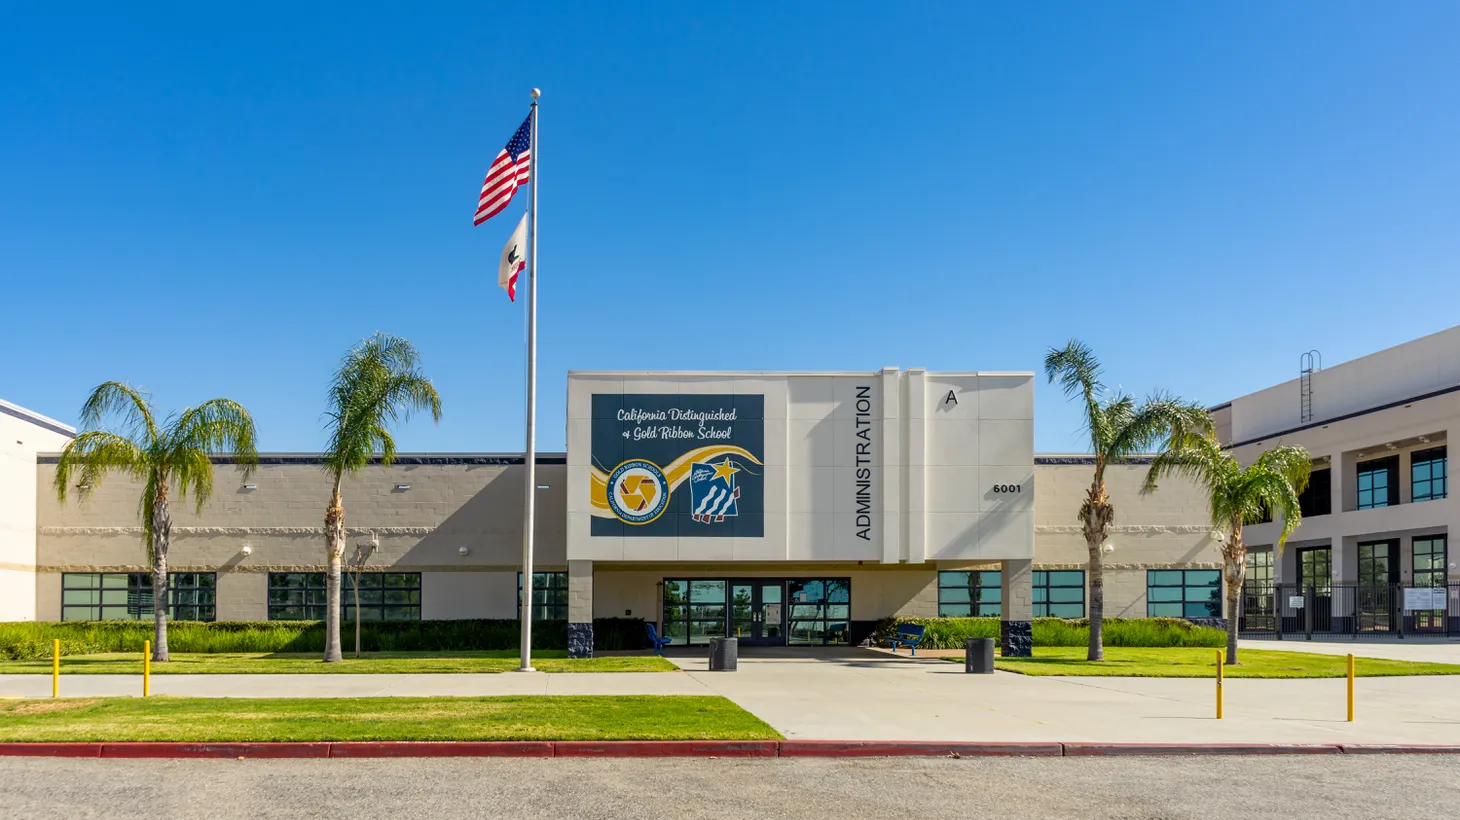 Exterior administration building on the campus of Los Osos High School located in Rancho Cucamonga, California.